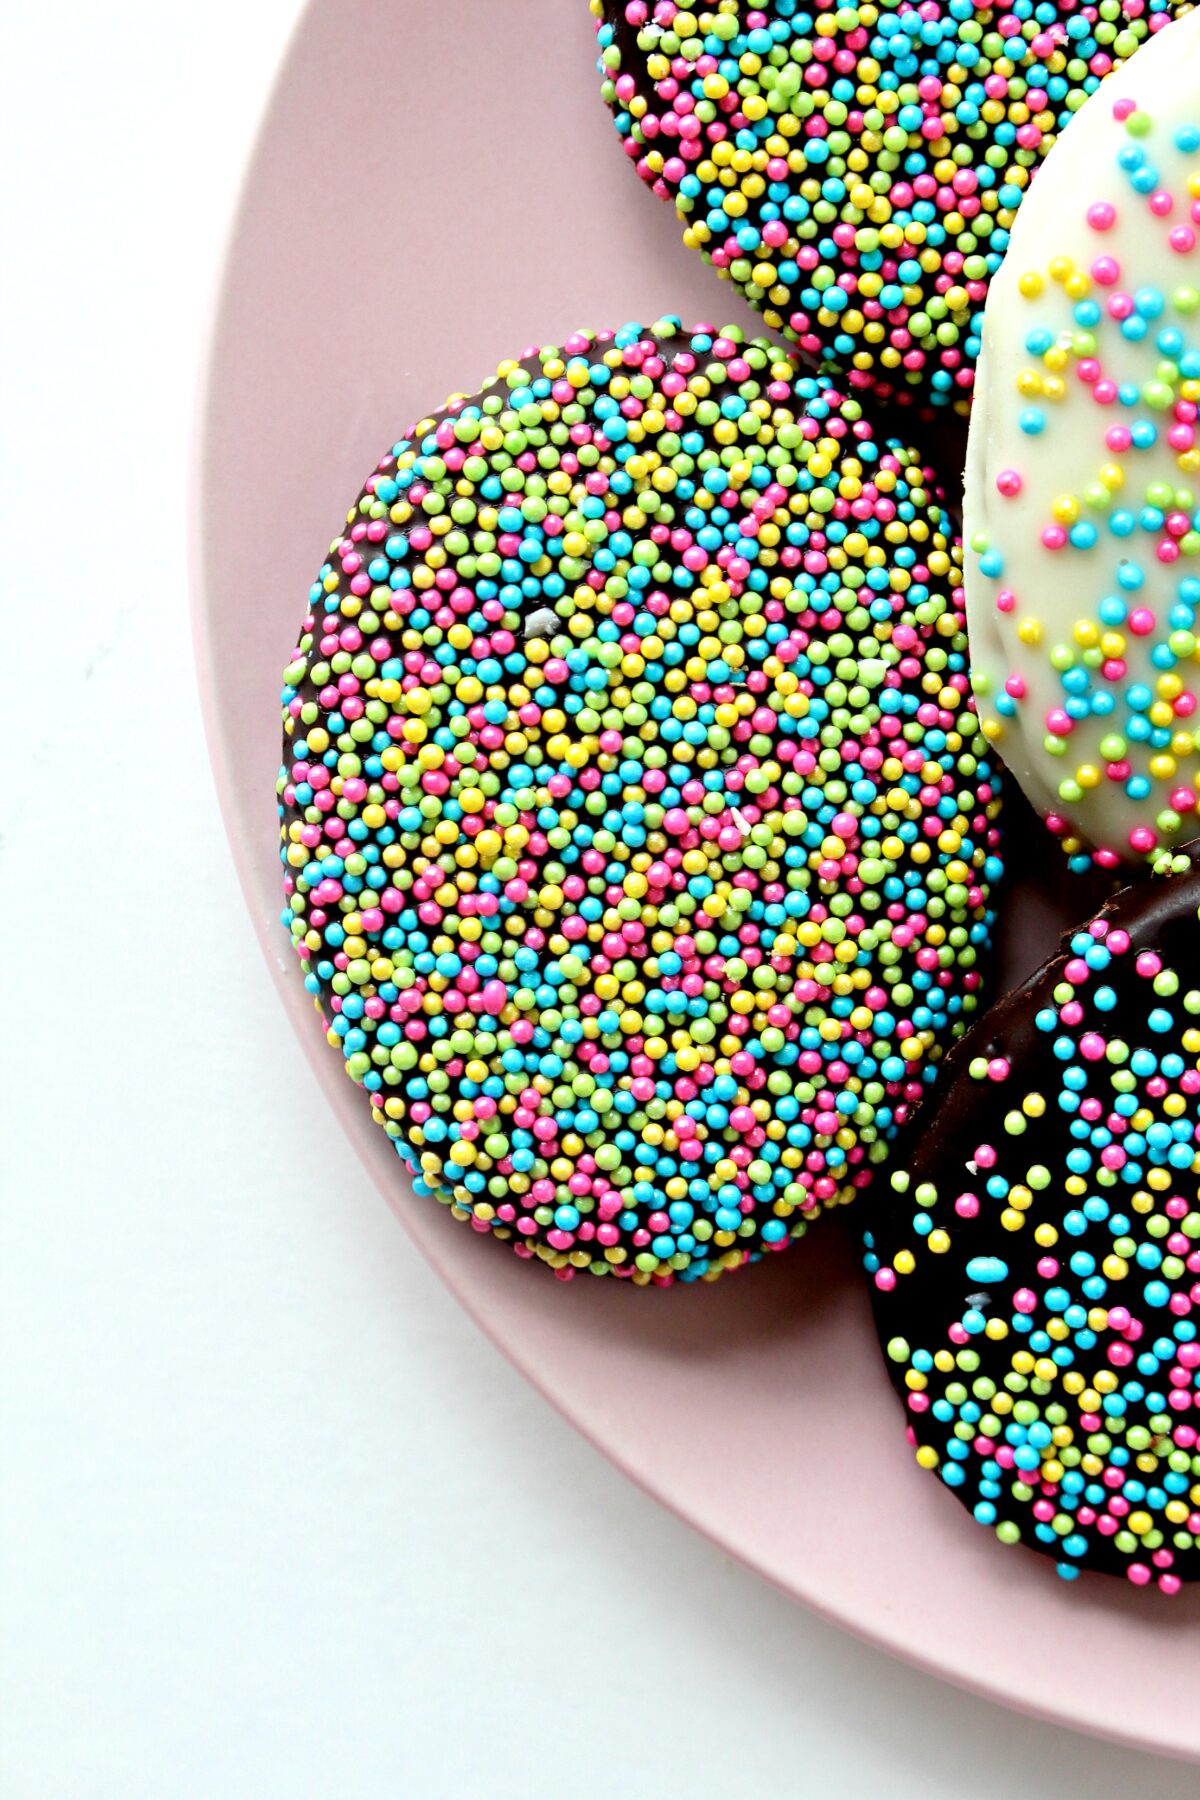 Closeup of Chocolate Covered Graham Cracker Easter Egg covered in pastel nonpareils.